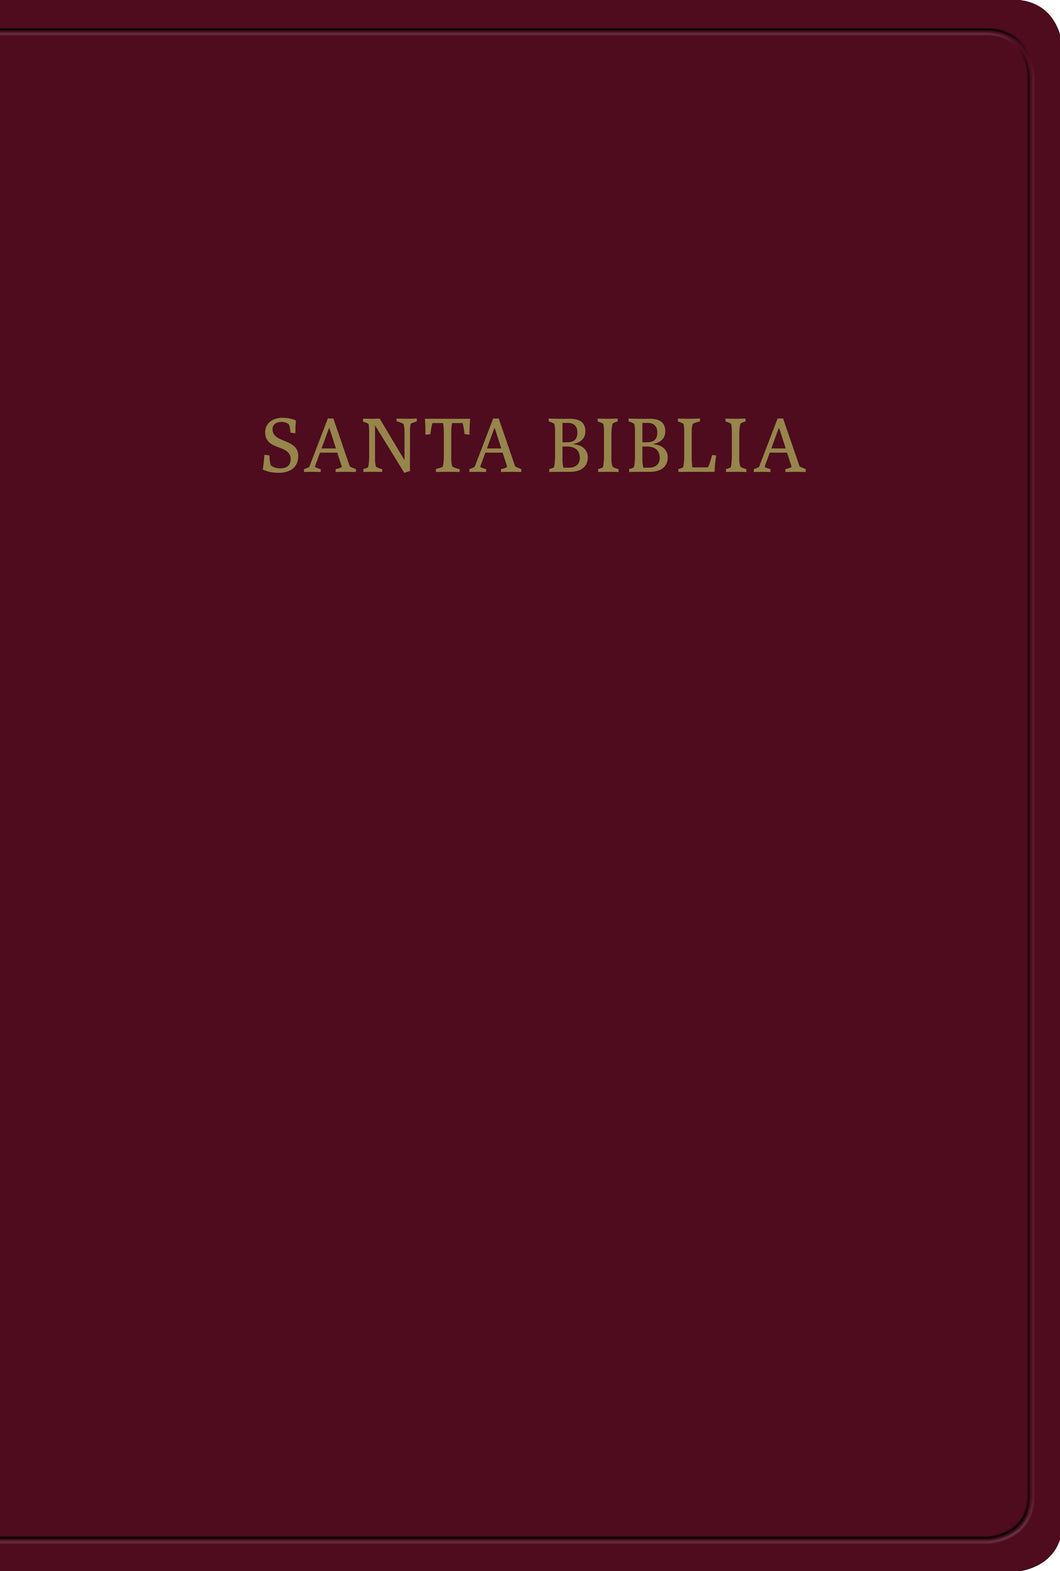 RVR 1960 Giant Print Reference Bible (Biblia Letra Gigante con Referencias)-Burgundy Imitation Leather Indexed